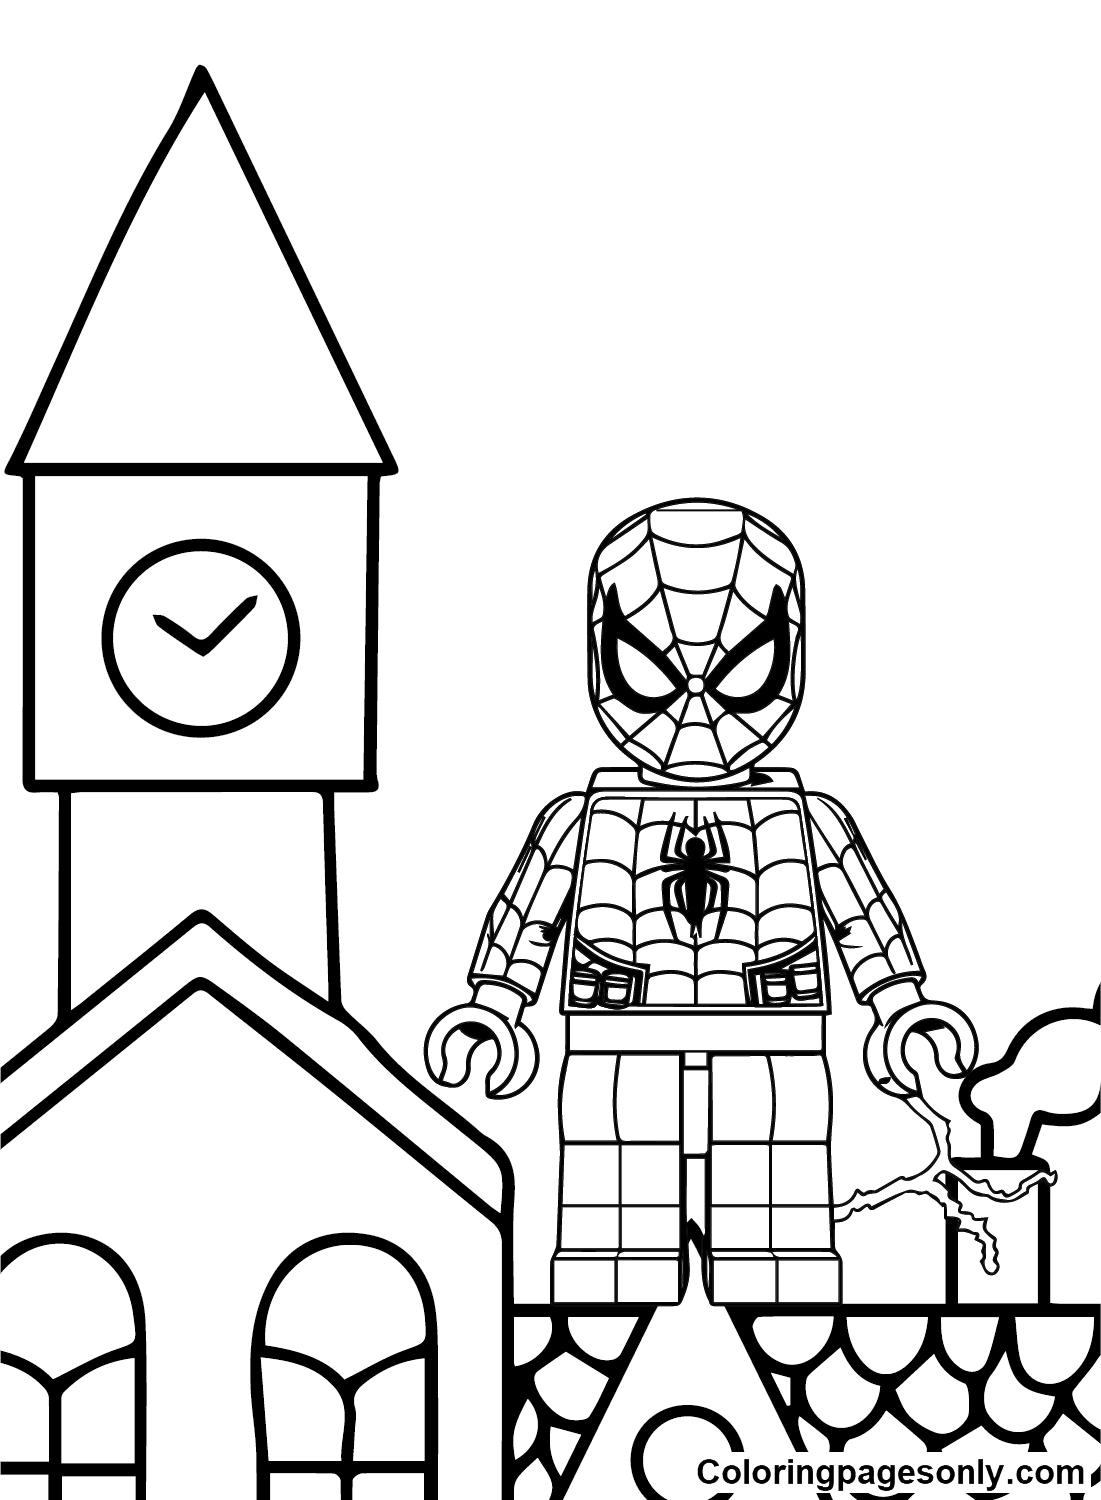 Images Lego Spiderman Coloring Pages